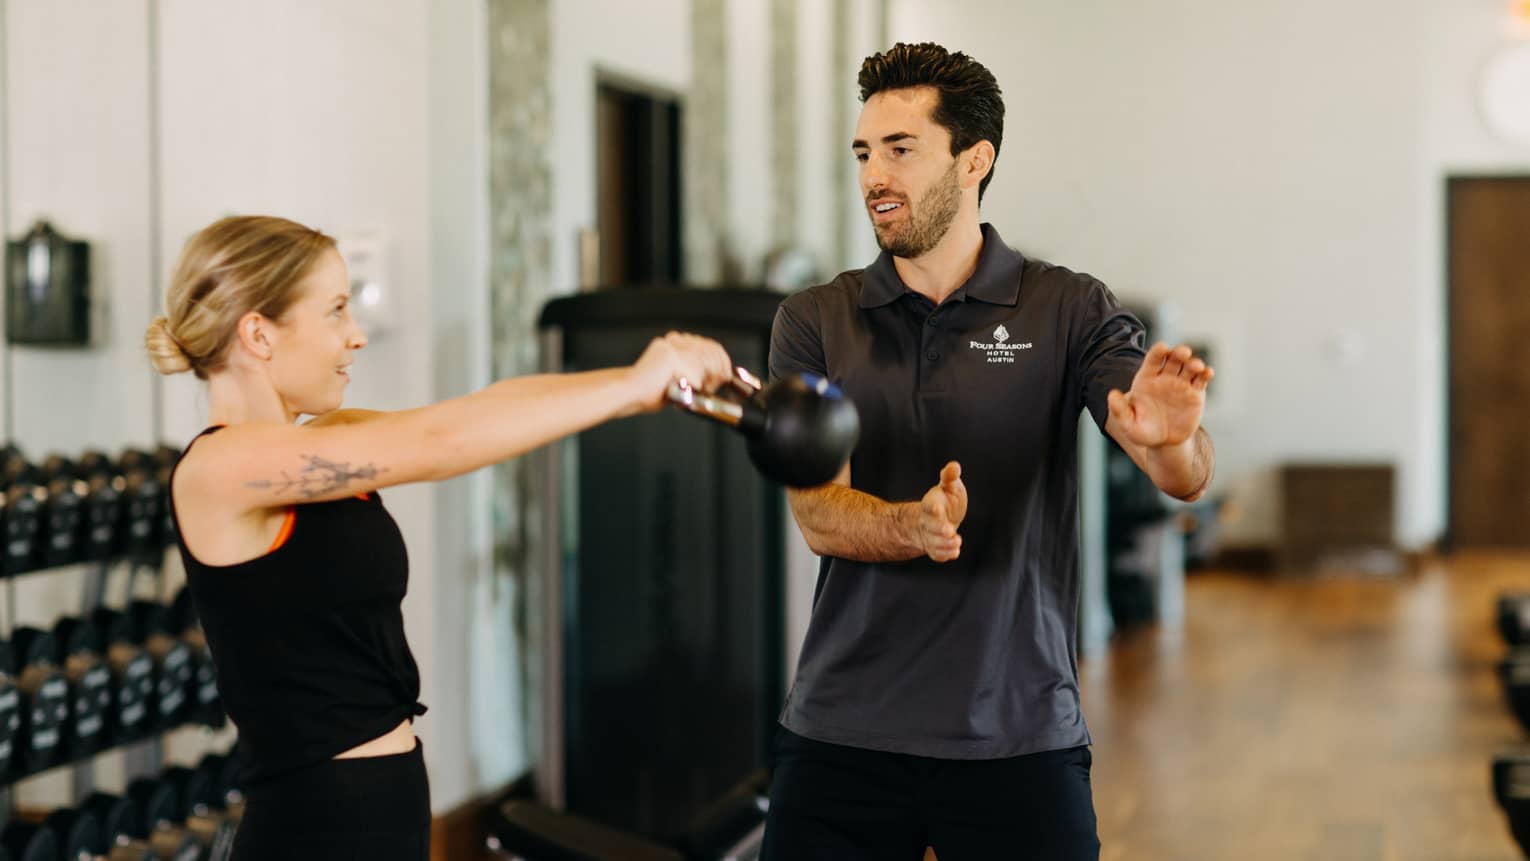 Male fitness trainer works with female guest who is using a kettlebell